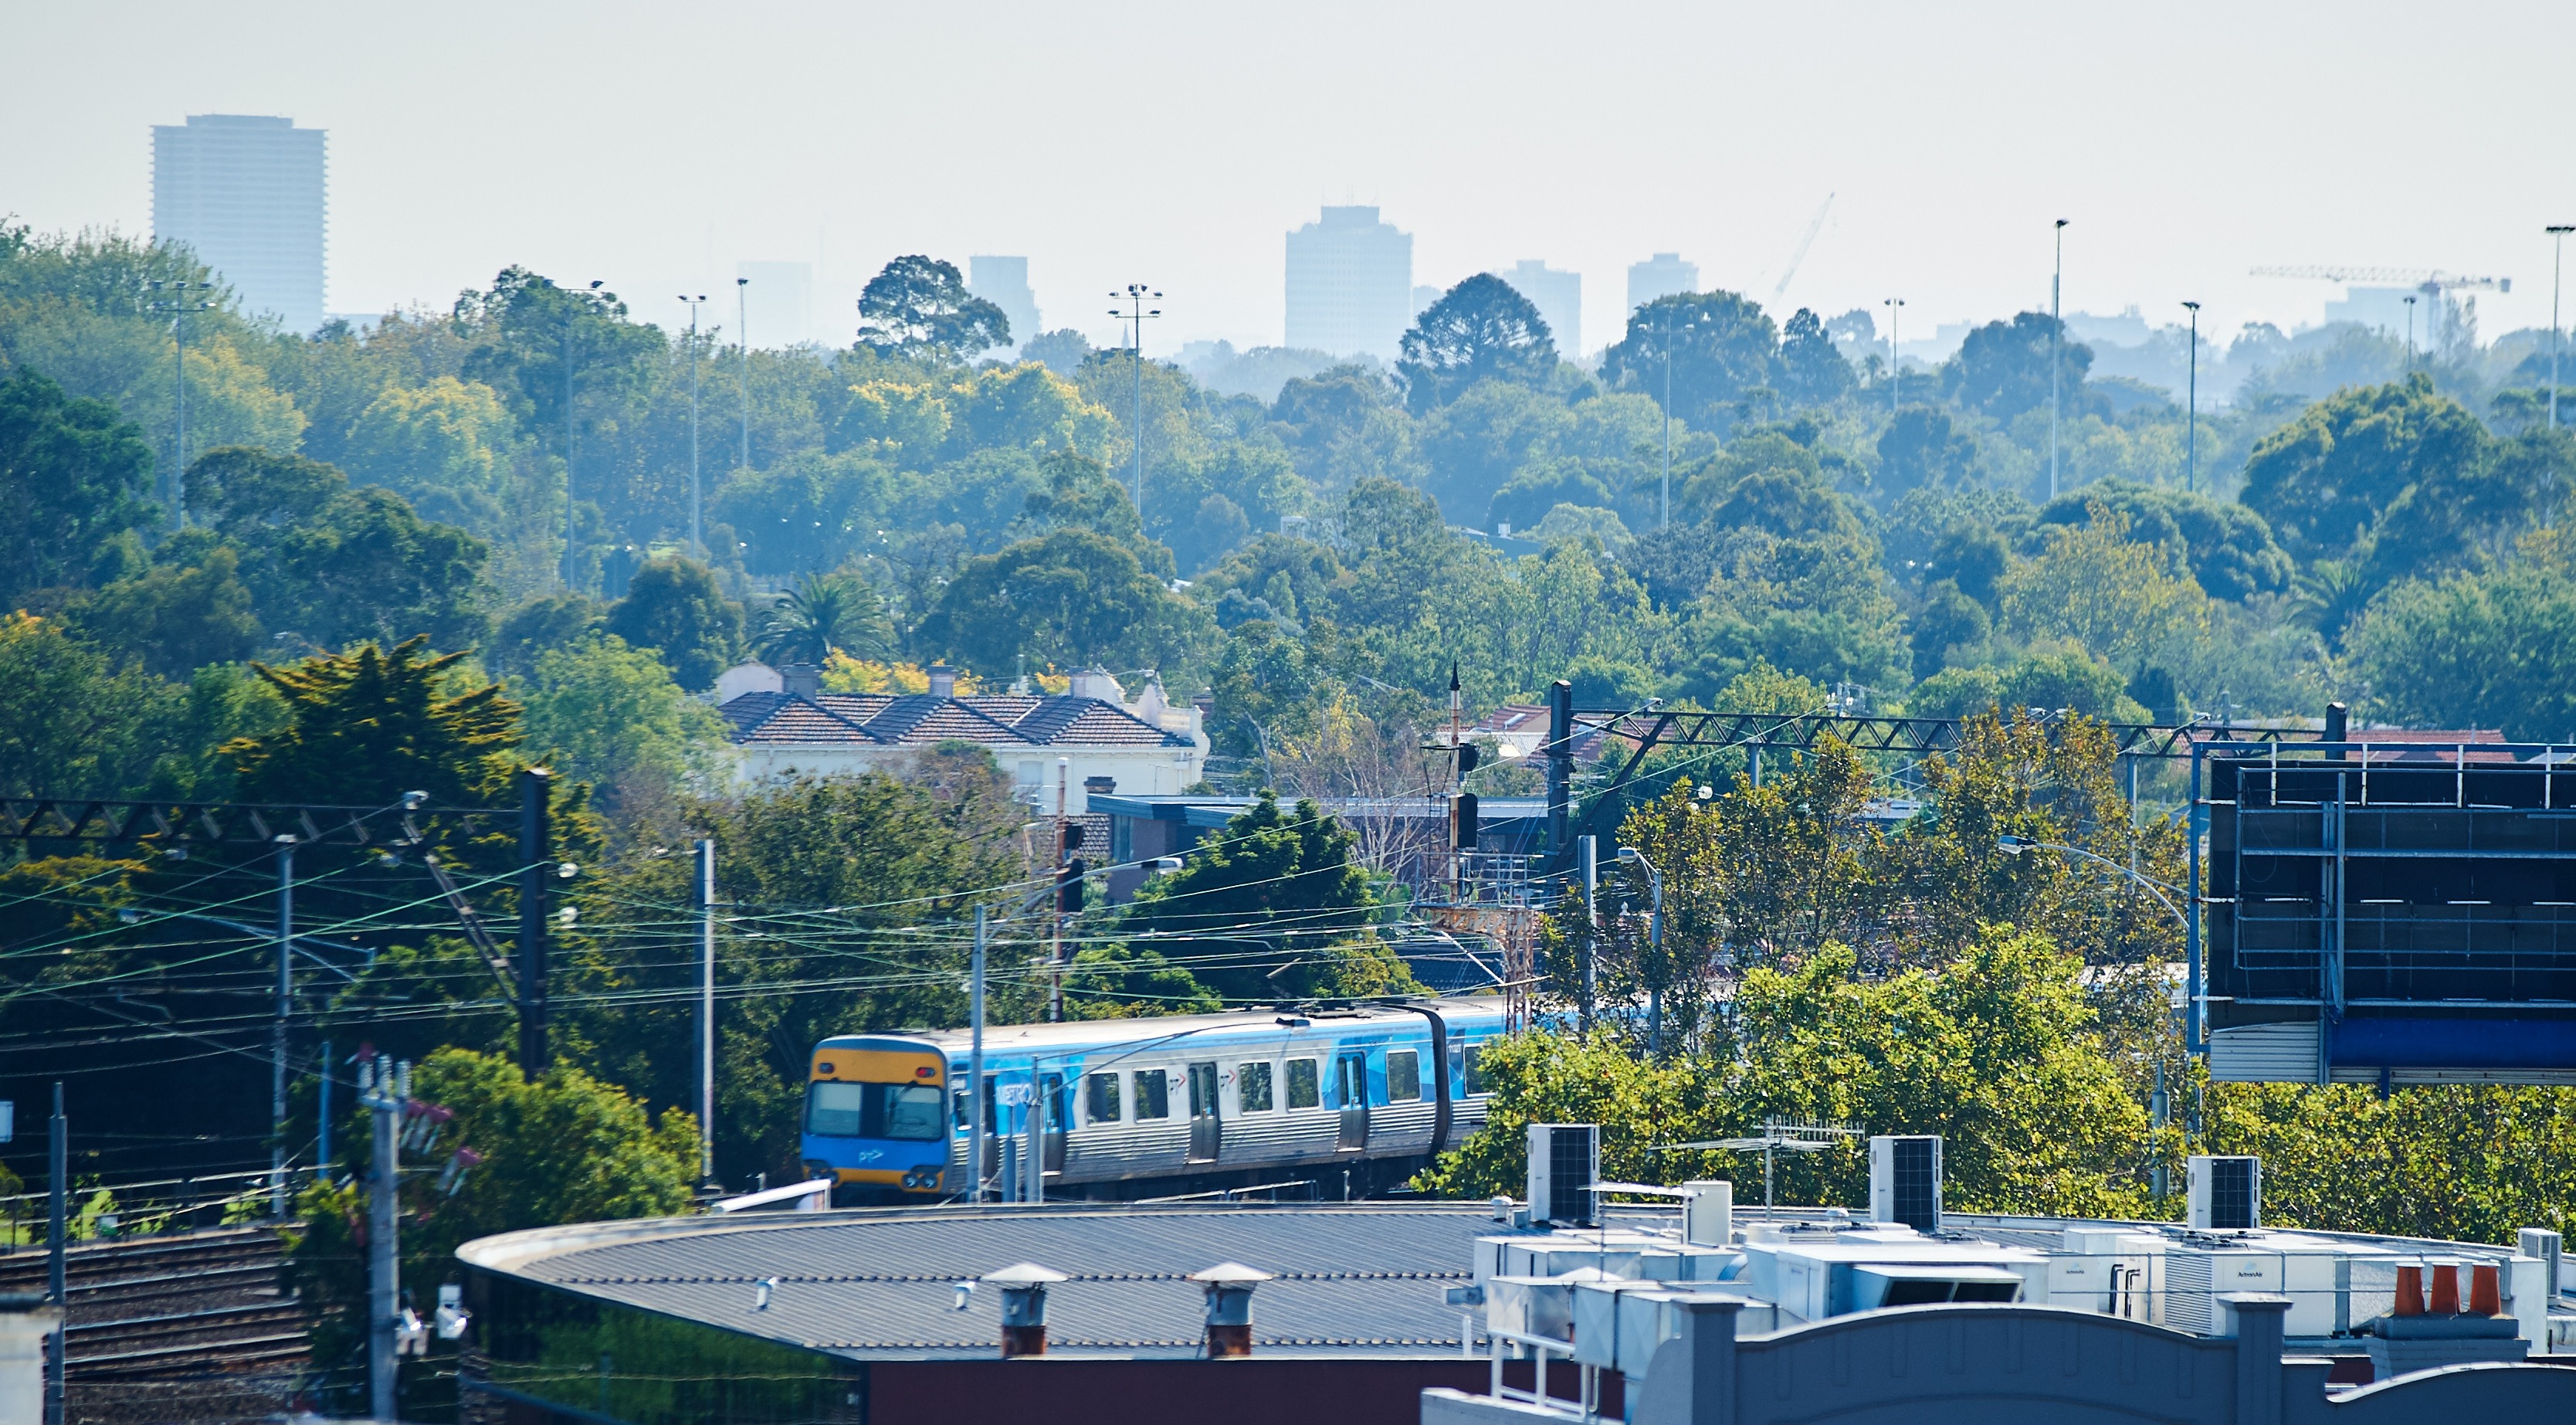 Metro train amidst buildings and treetops